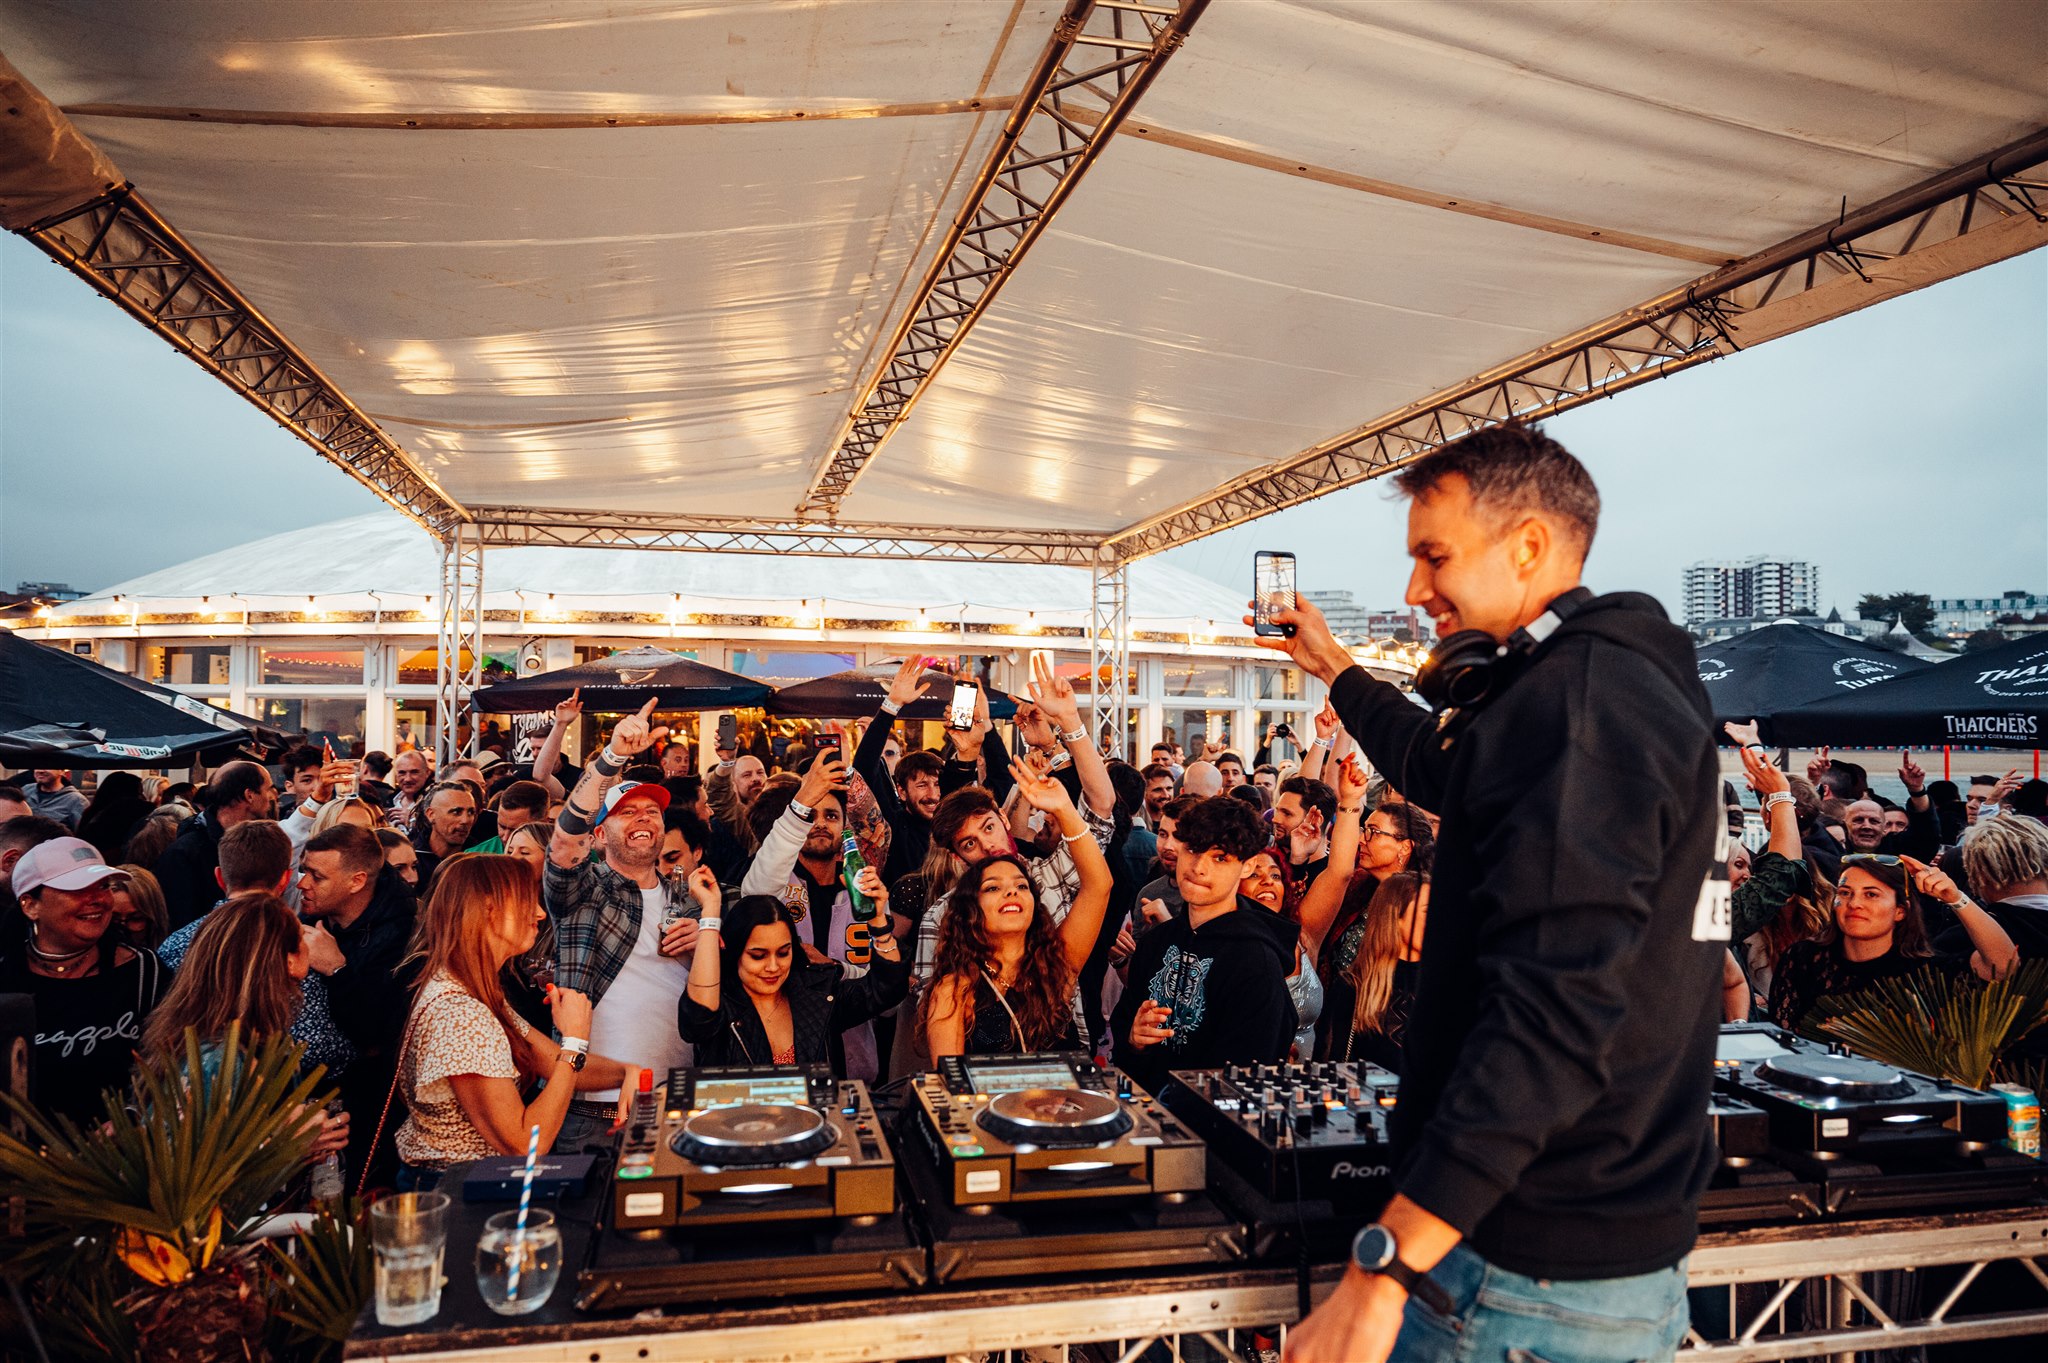 Anjunadeep global DJ acts to headline Pier Pressure Event this August bank holiday on the iconic Bournemouth Pier!